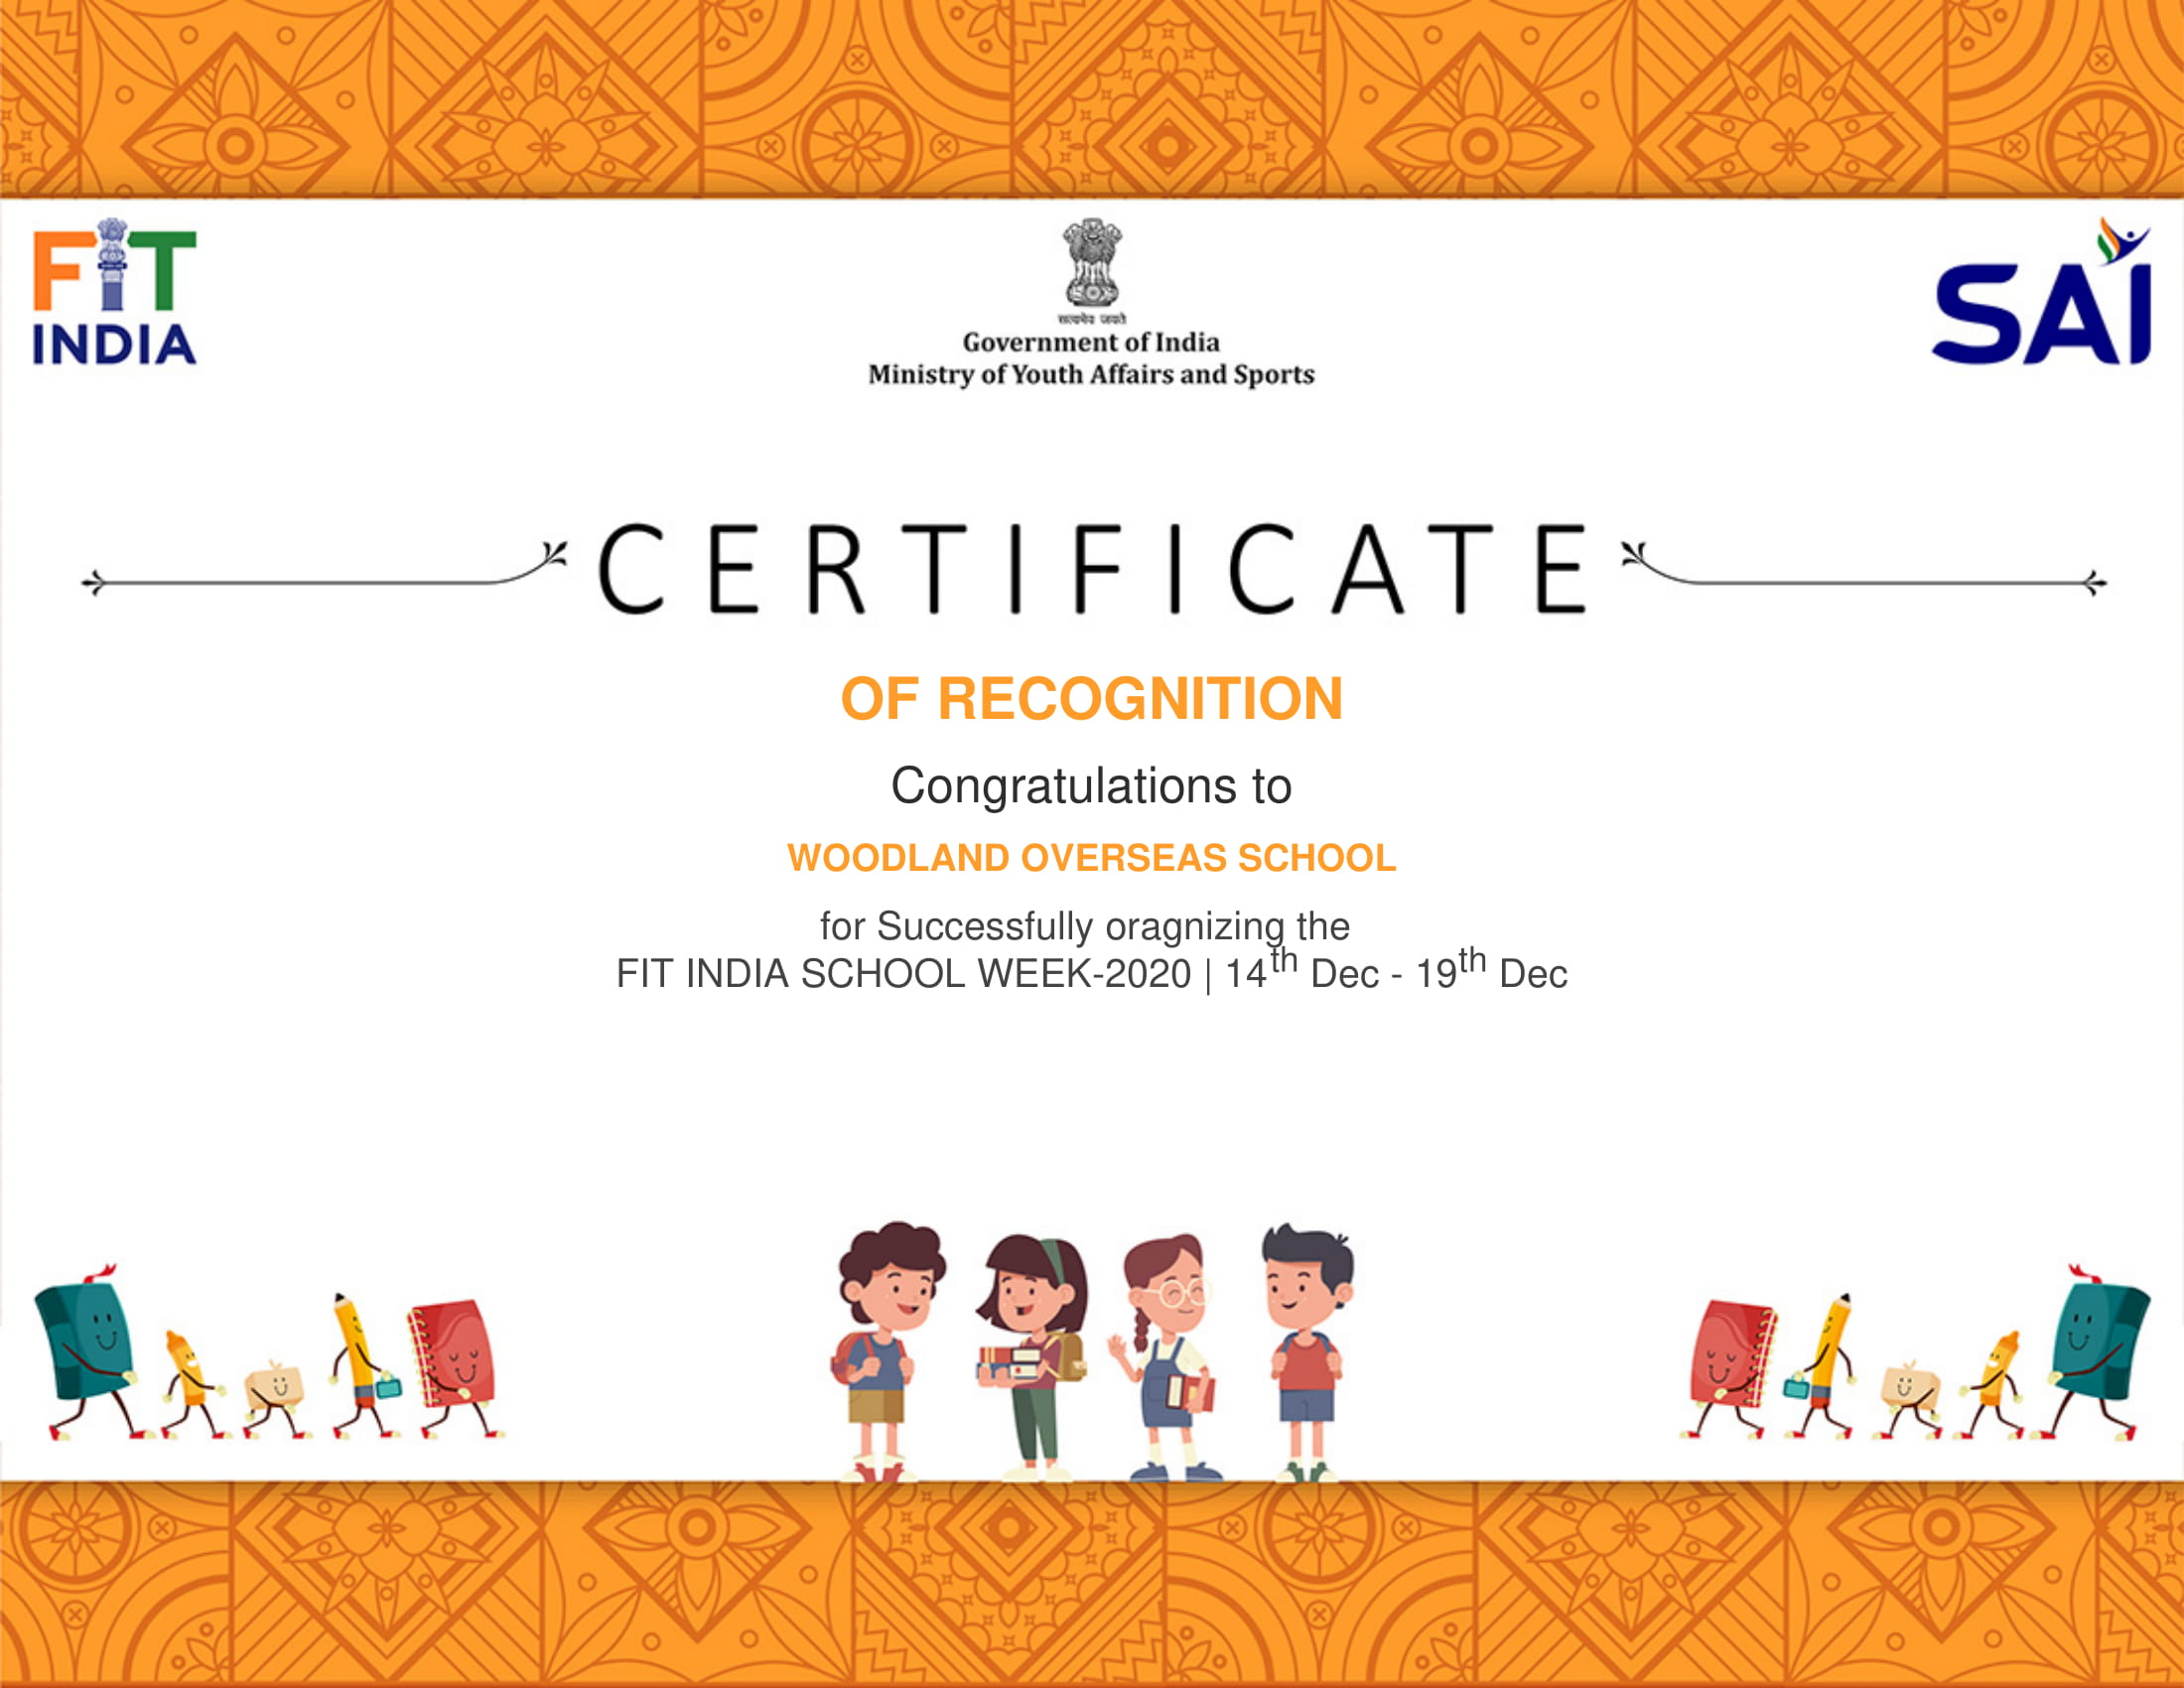 Certificate Released by CBSE for Grand Success of FIT INDIA Week